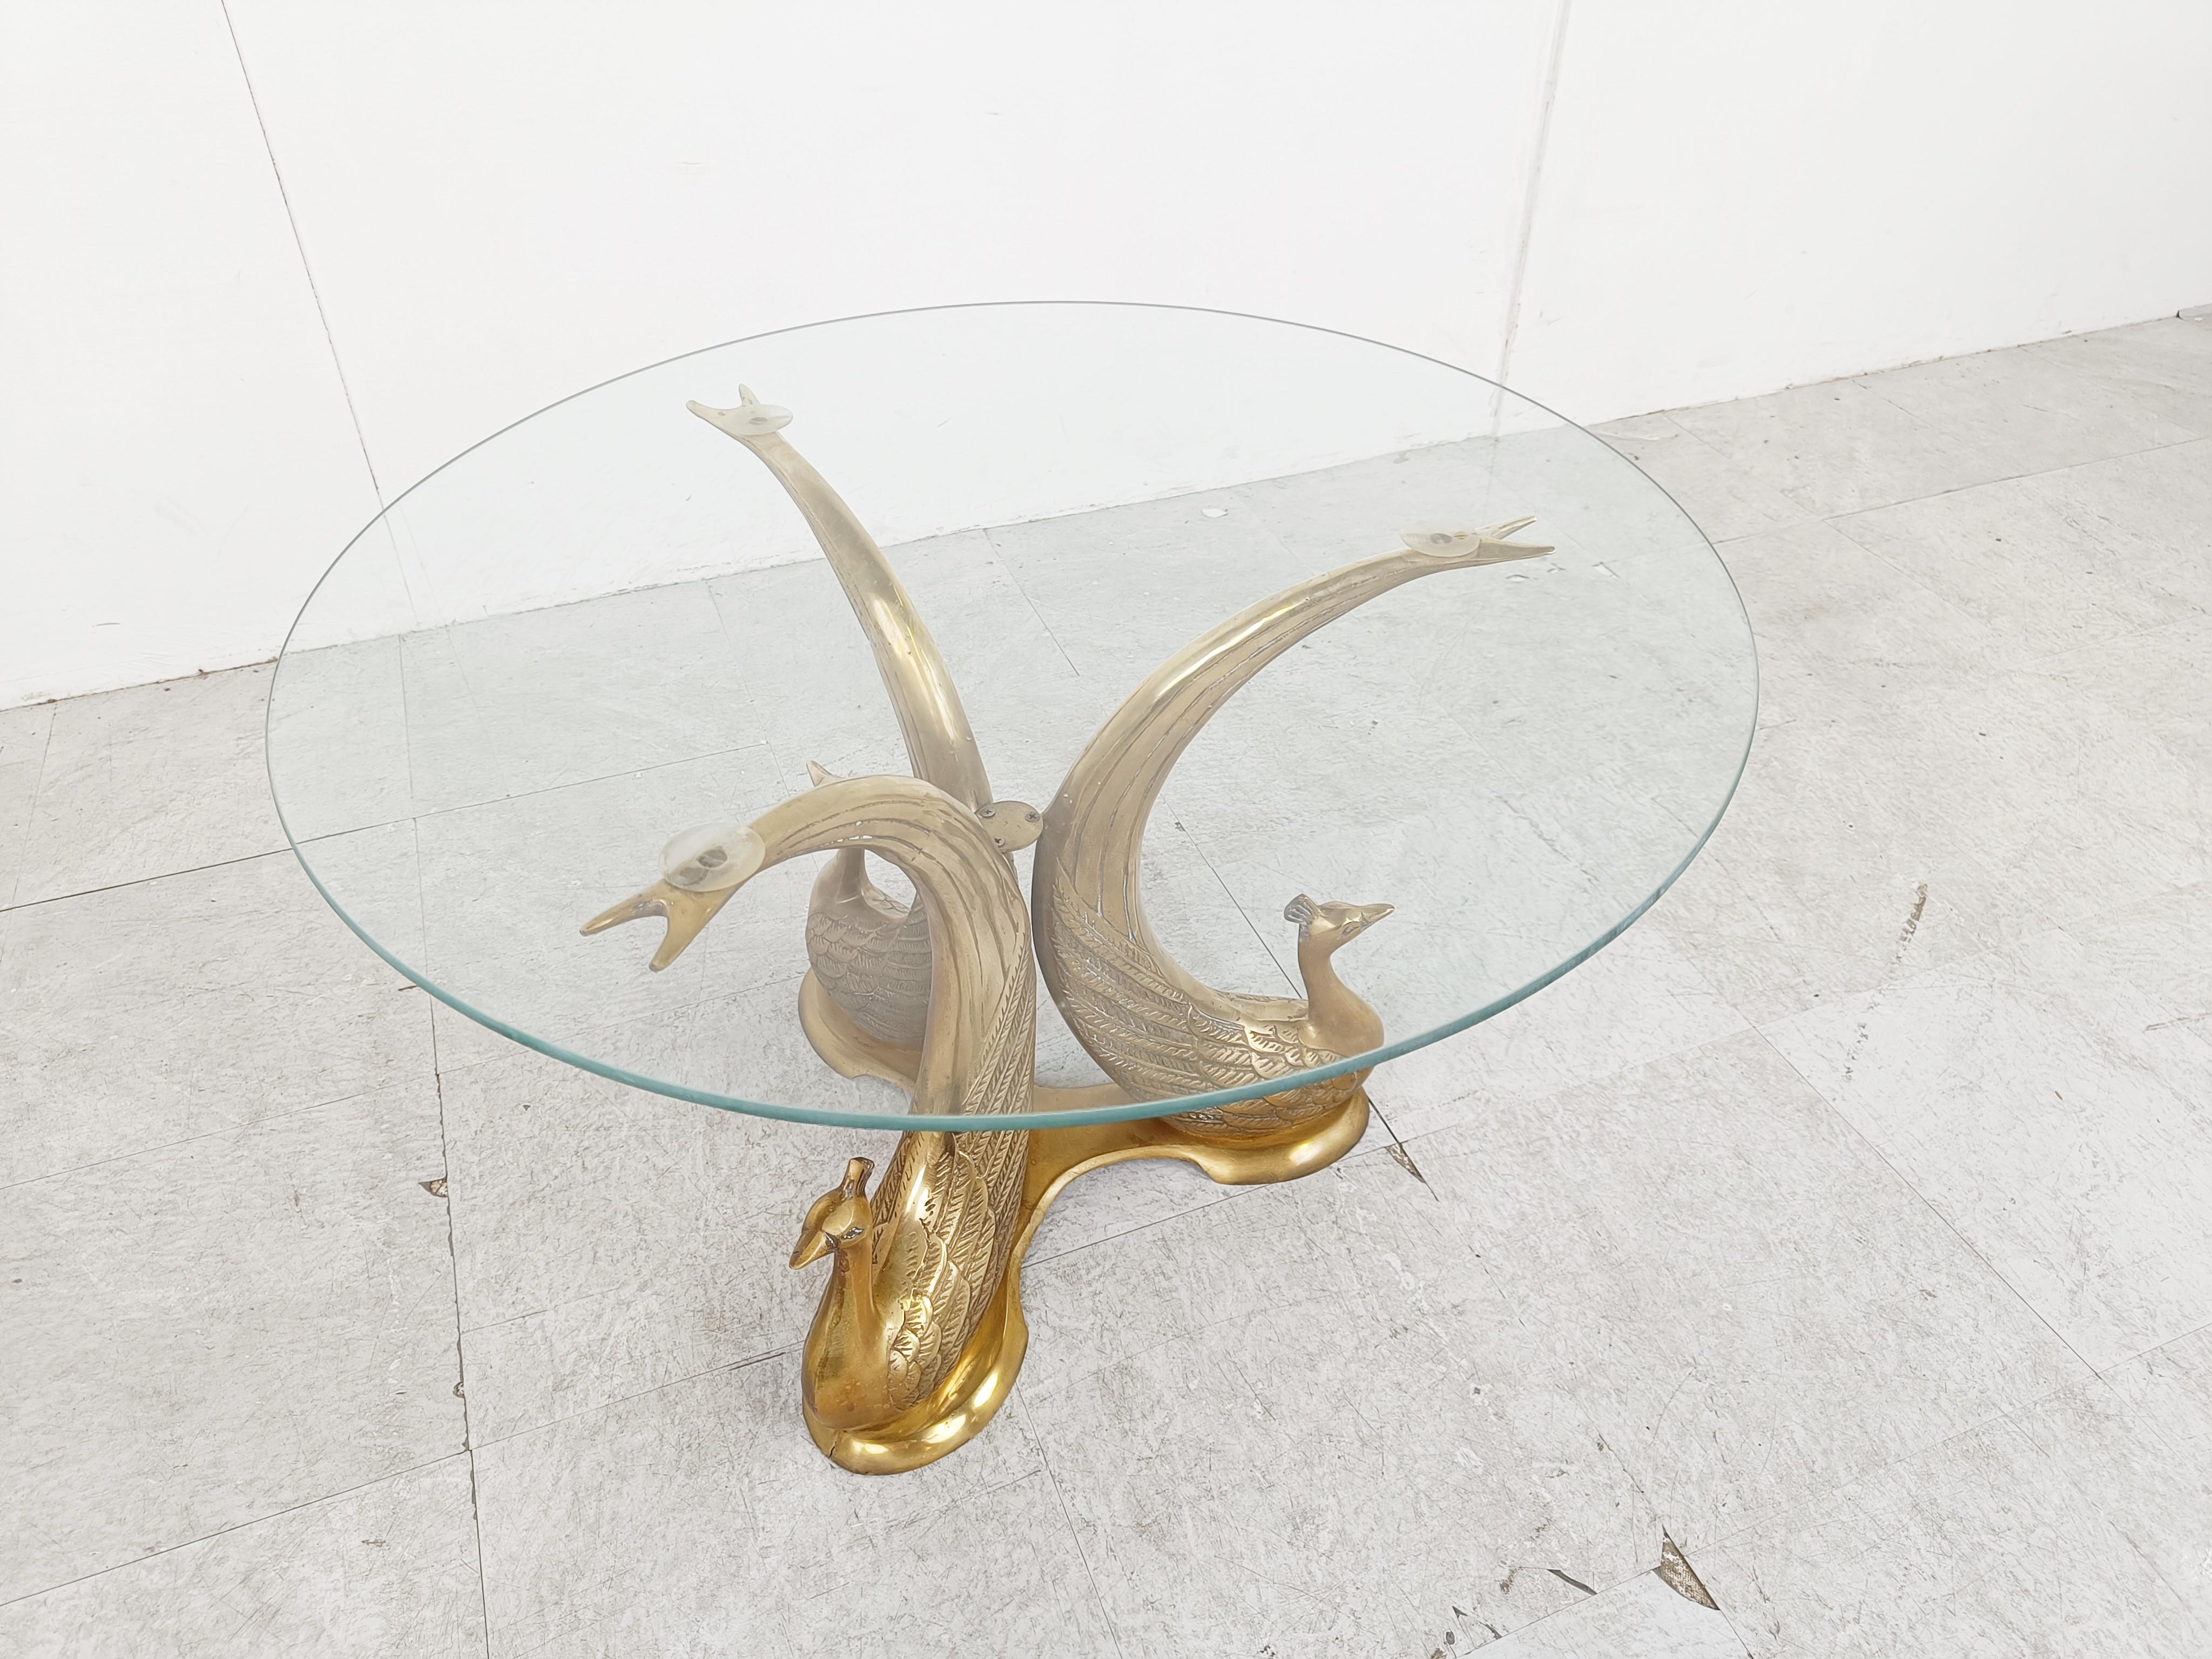 Hollywood regency brass elephant coffee table.

The coffee table consists of a brass base featuring 3 brass peacocks and a clear glass top.

We have 3 of these tables available

Dimensions:
Height: 42cm/16.53